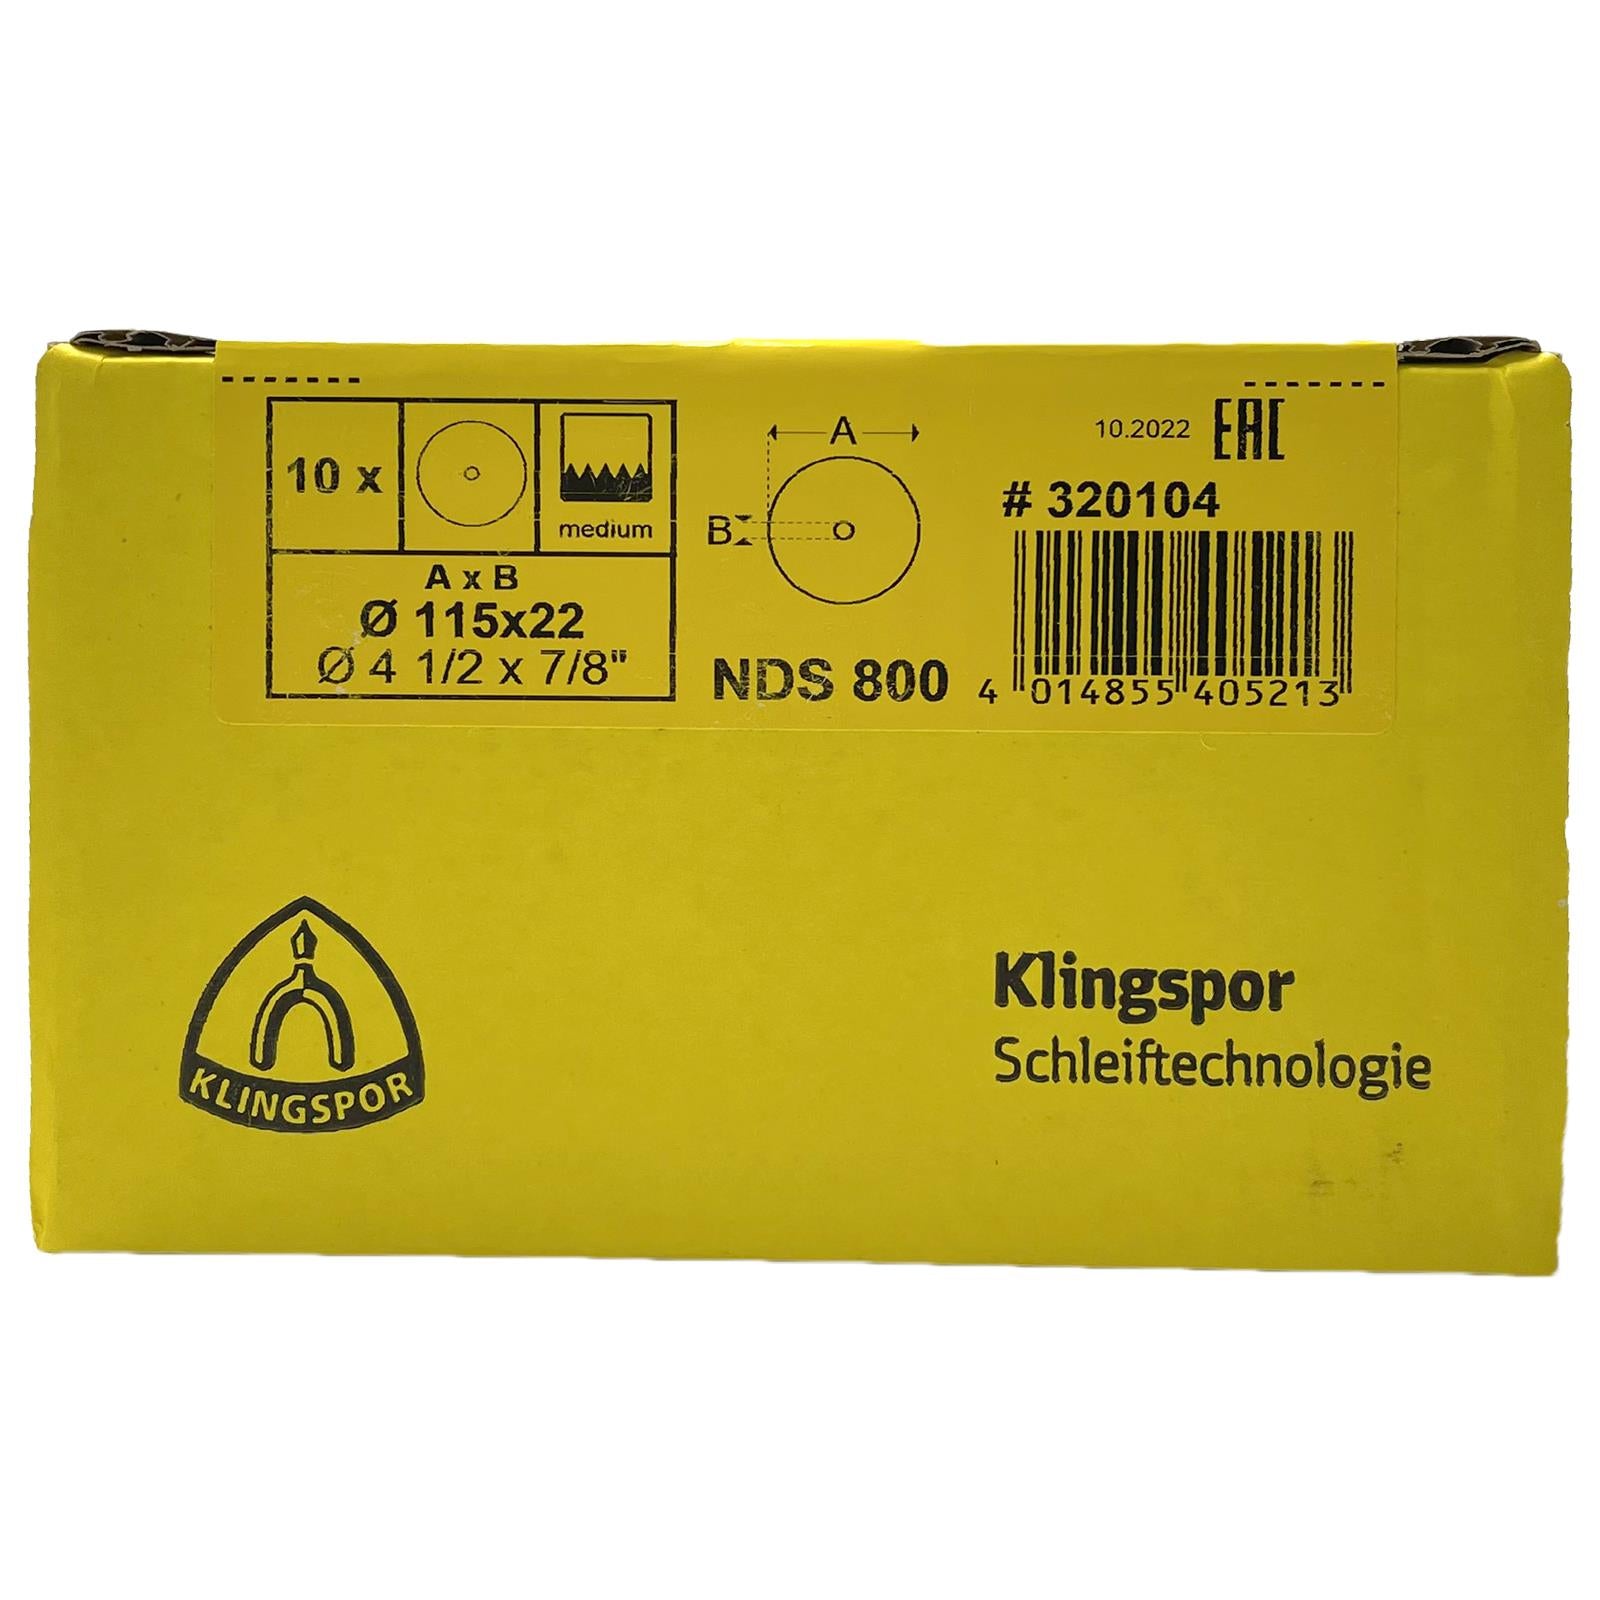 Klingspor Non Woven Web Discs for Metals Stainless Steel Like Scotch Brite 115mm